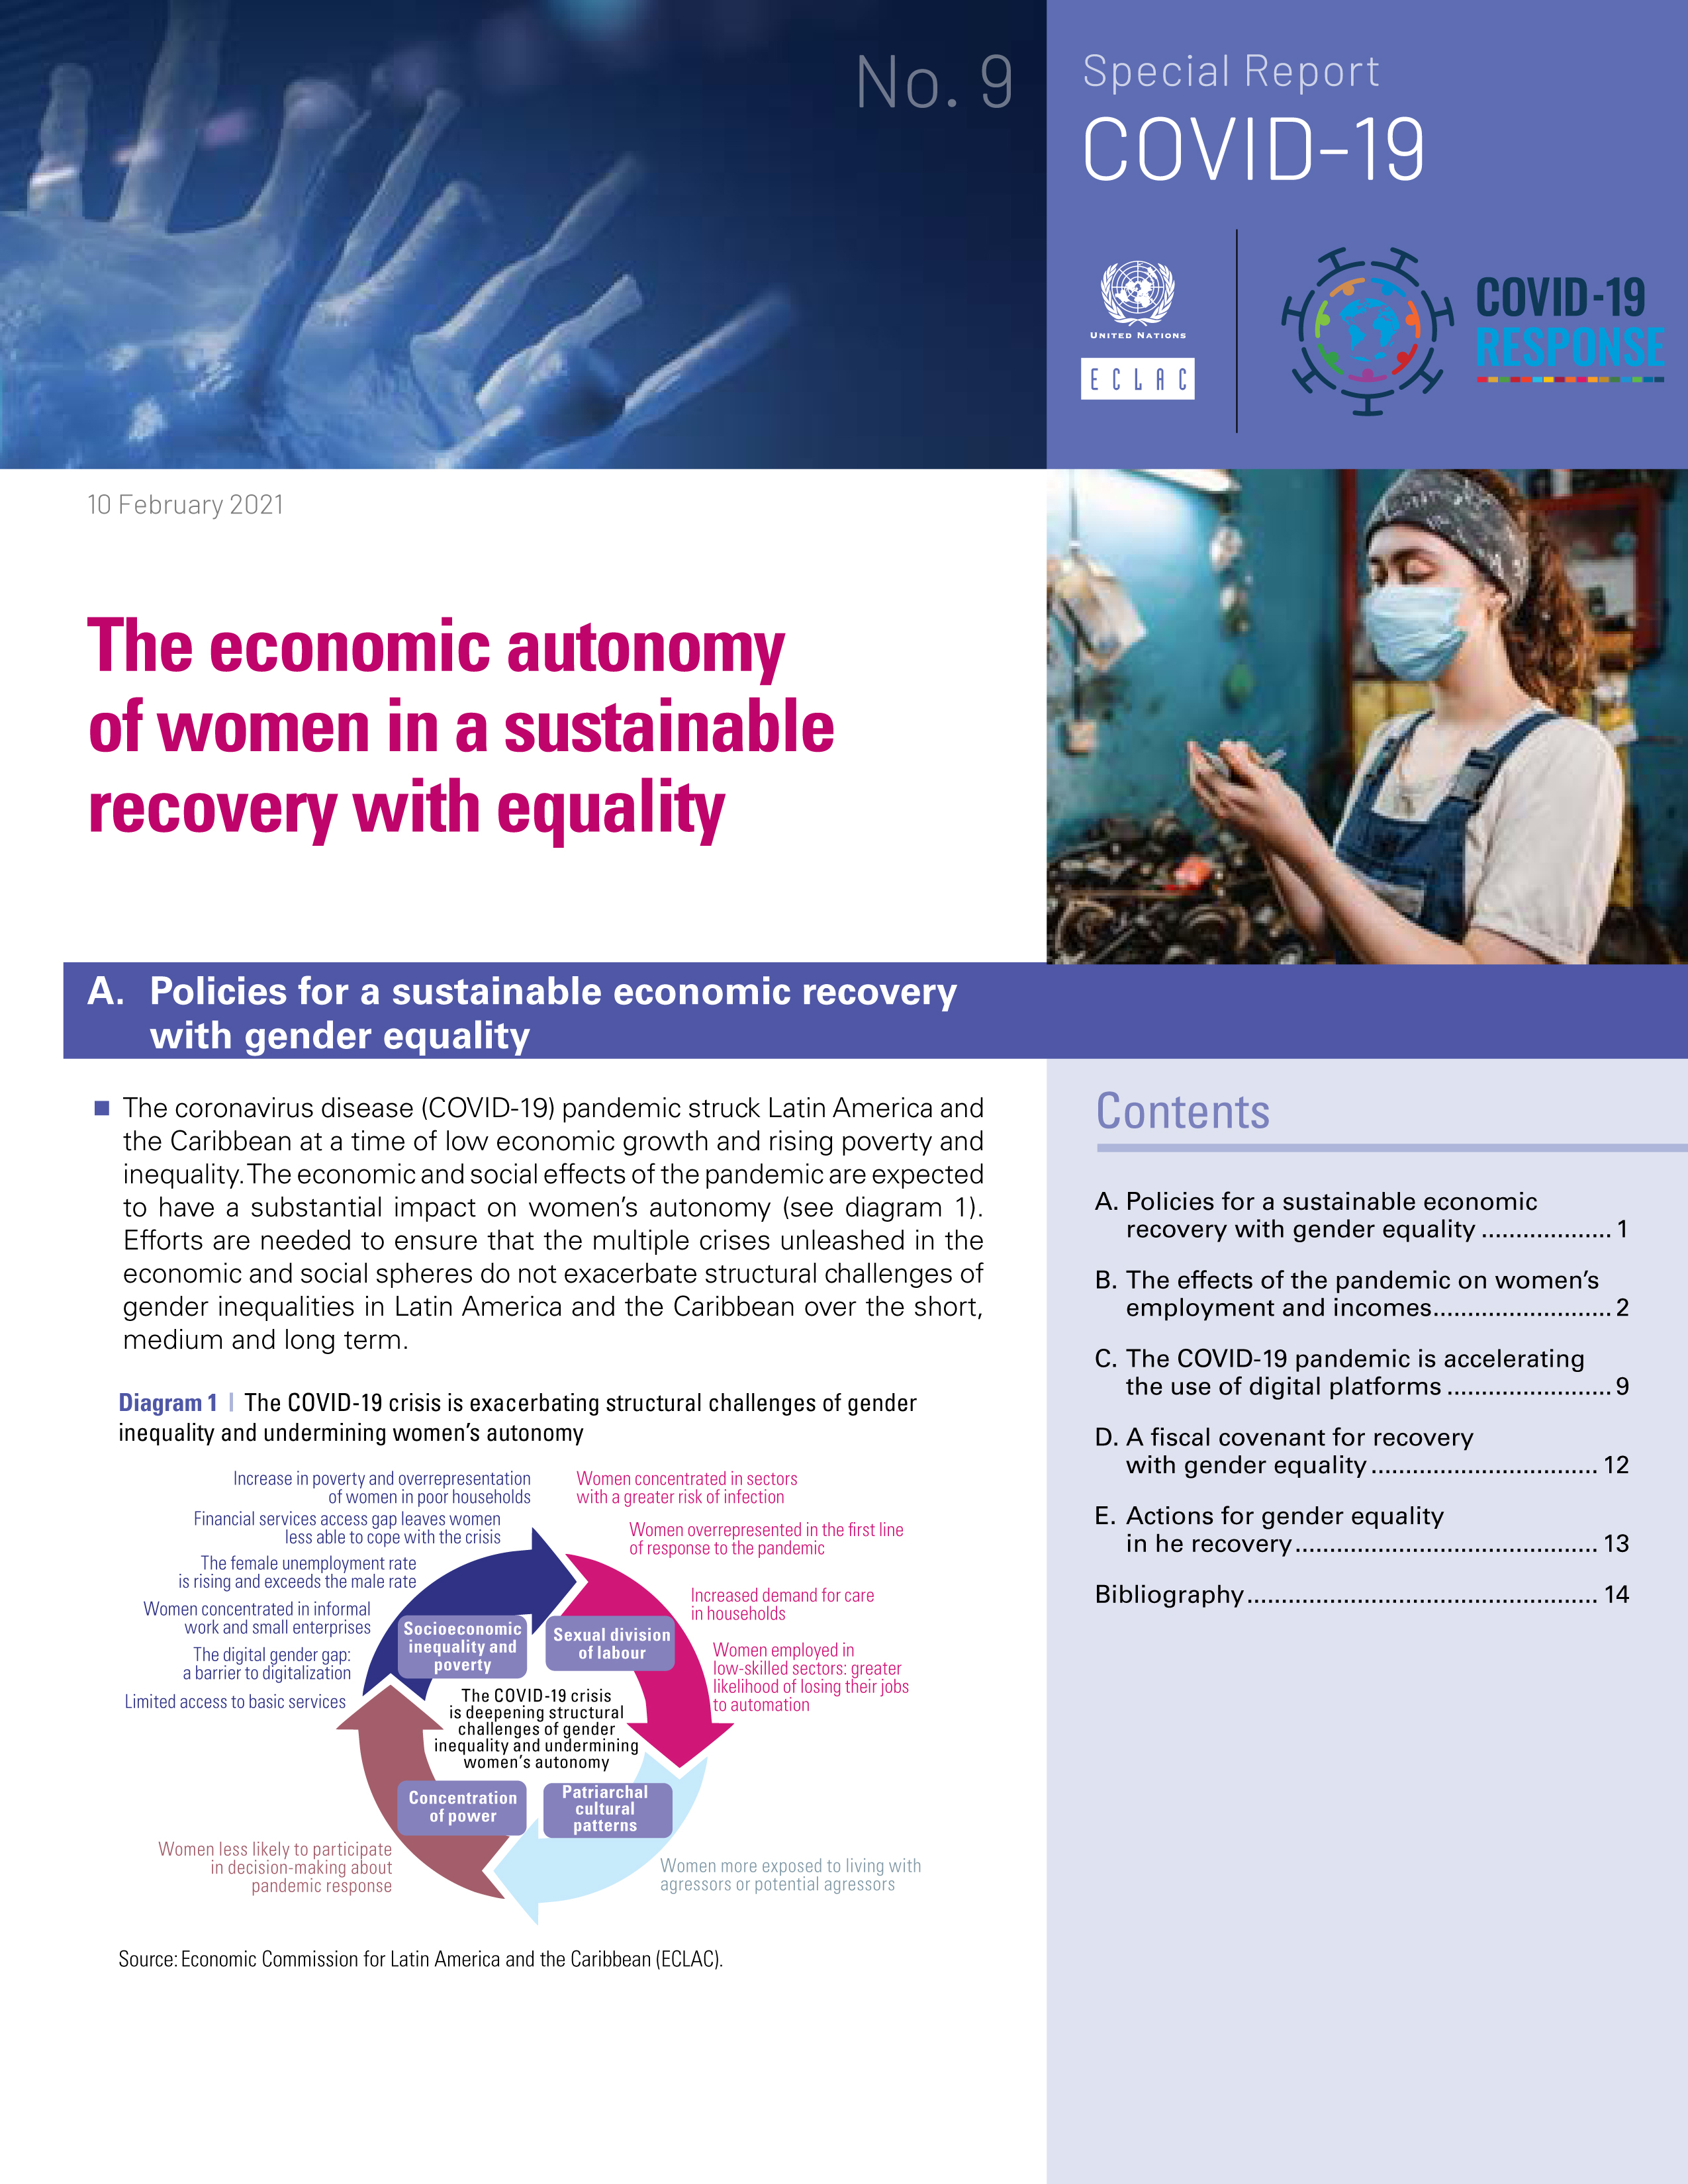 image of The Economic Autonomy of Women in a Sustainable Recovery with Equality